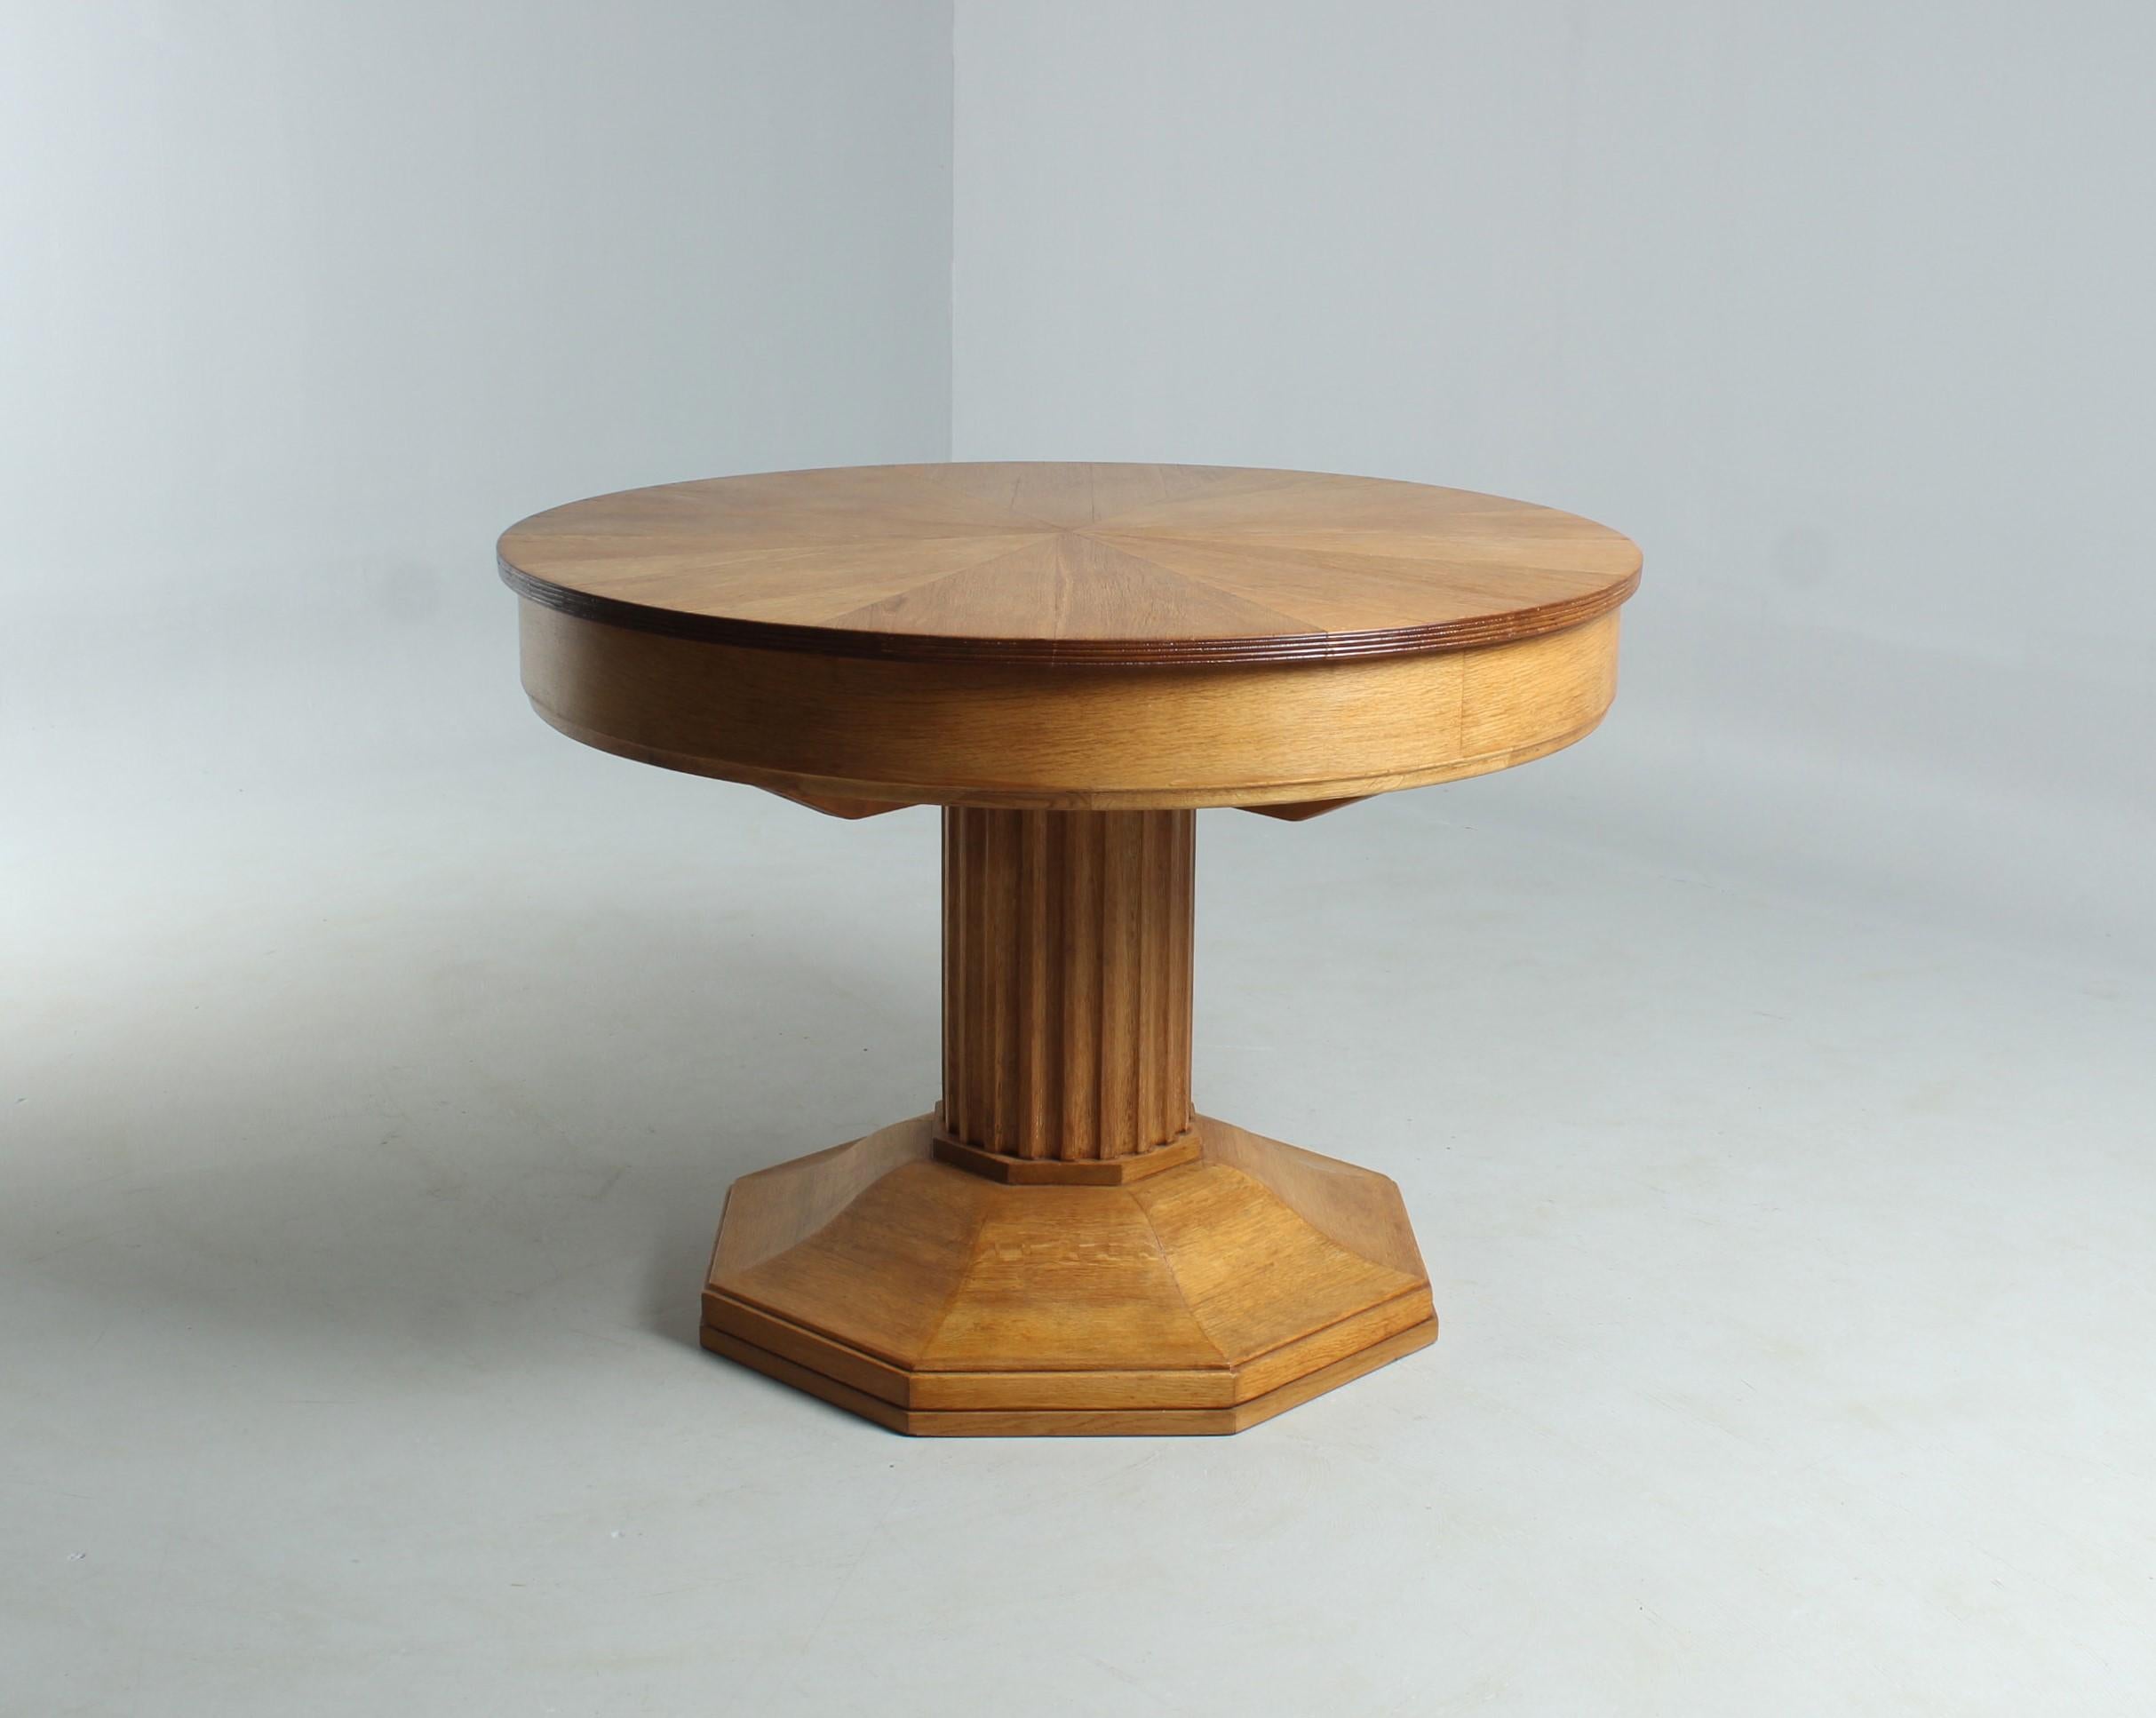 Liegnitz ring table

Liegnitz (then Silesia, now Poland) - Workshop Josef Seiler
oak
1920s

Dimensions: height 78 cm, diameter 110 cm - 155 cm

Description:
Quite extraordinary round dining table, solid oak and veneered.

When closed, it is a round